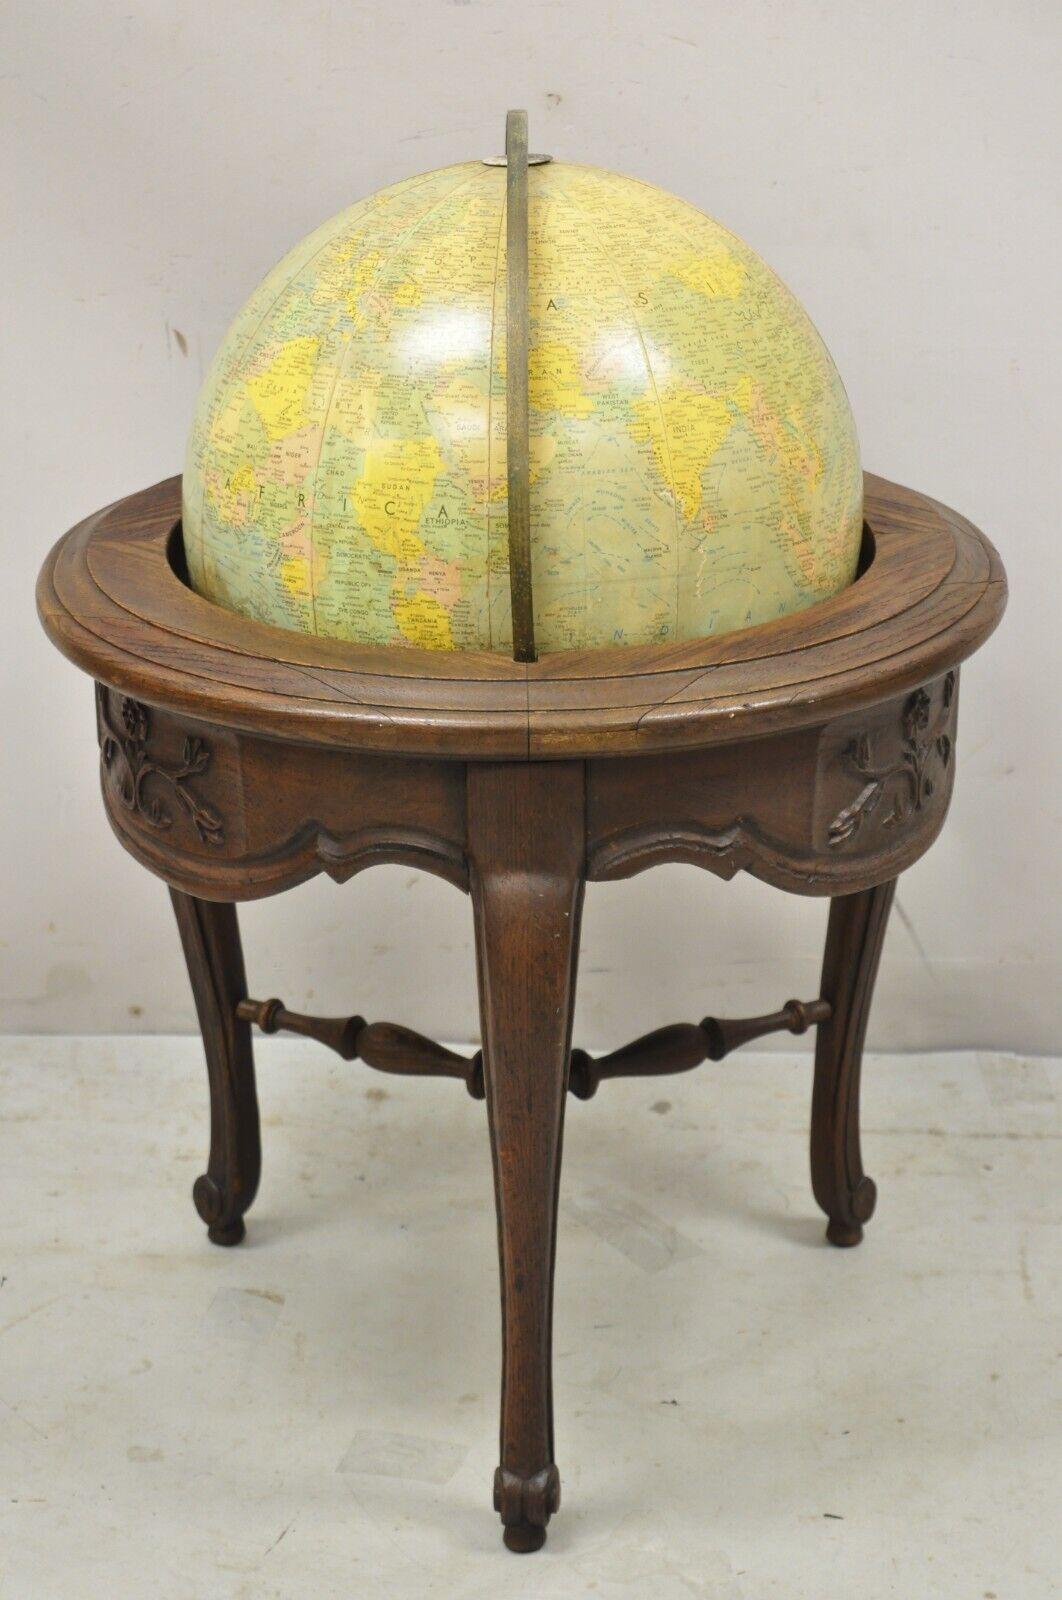 Vintage Replogle Globes French Country Provincial style Revolving floor globe oak stand. Item features fiberglass revolving globe, solid wood frame, beautiful wood grain, distressed finish, nicely carved details, cabriole legs. Circa mid 20th